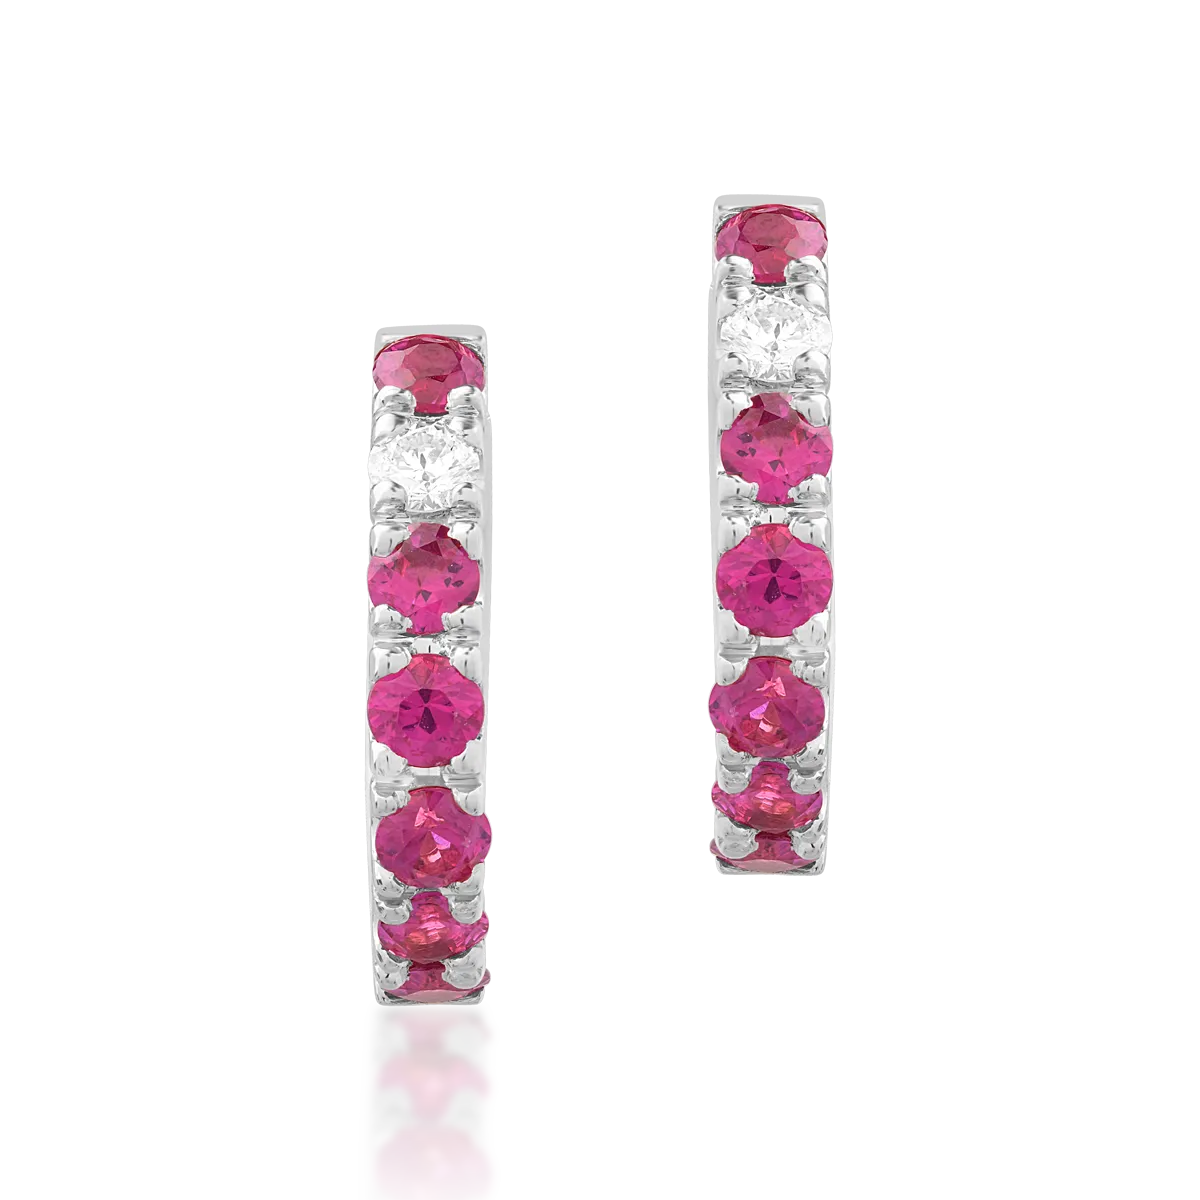 18K white gold earrings with 0.84ct rubies and 0.1ct diamonds